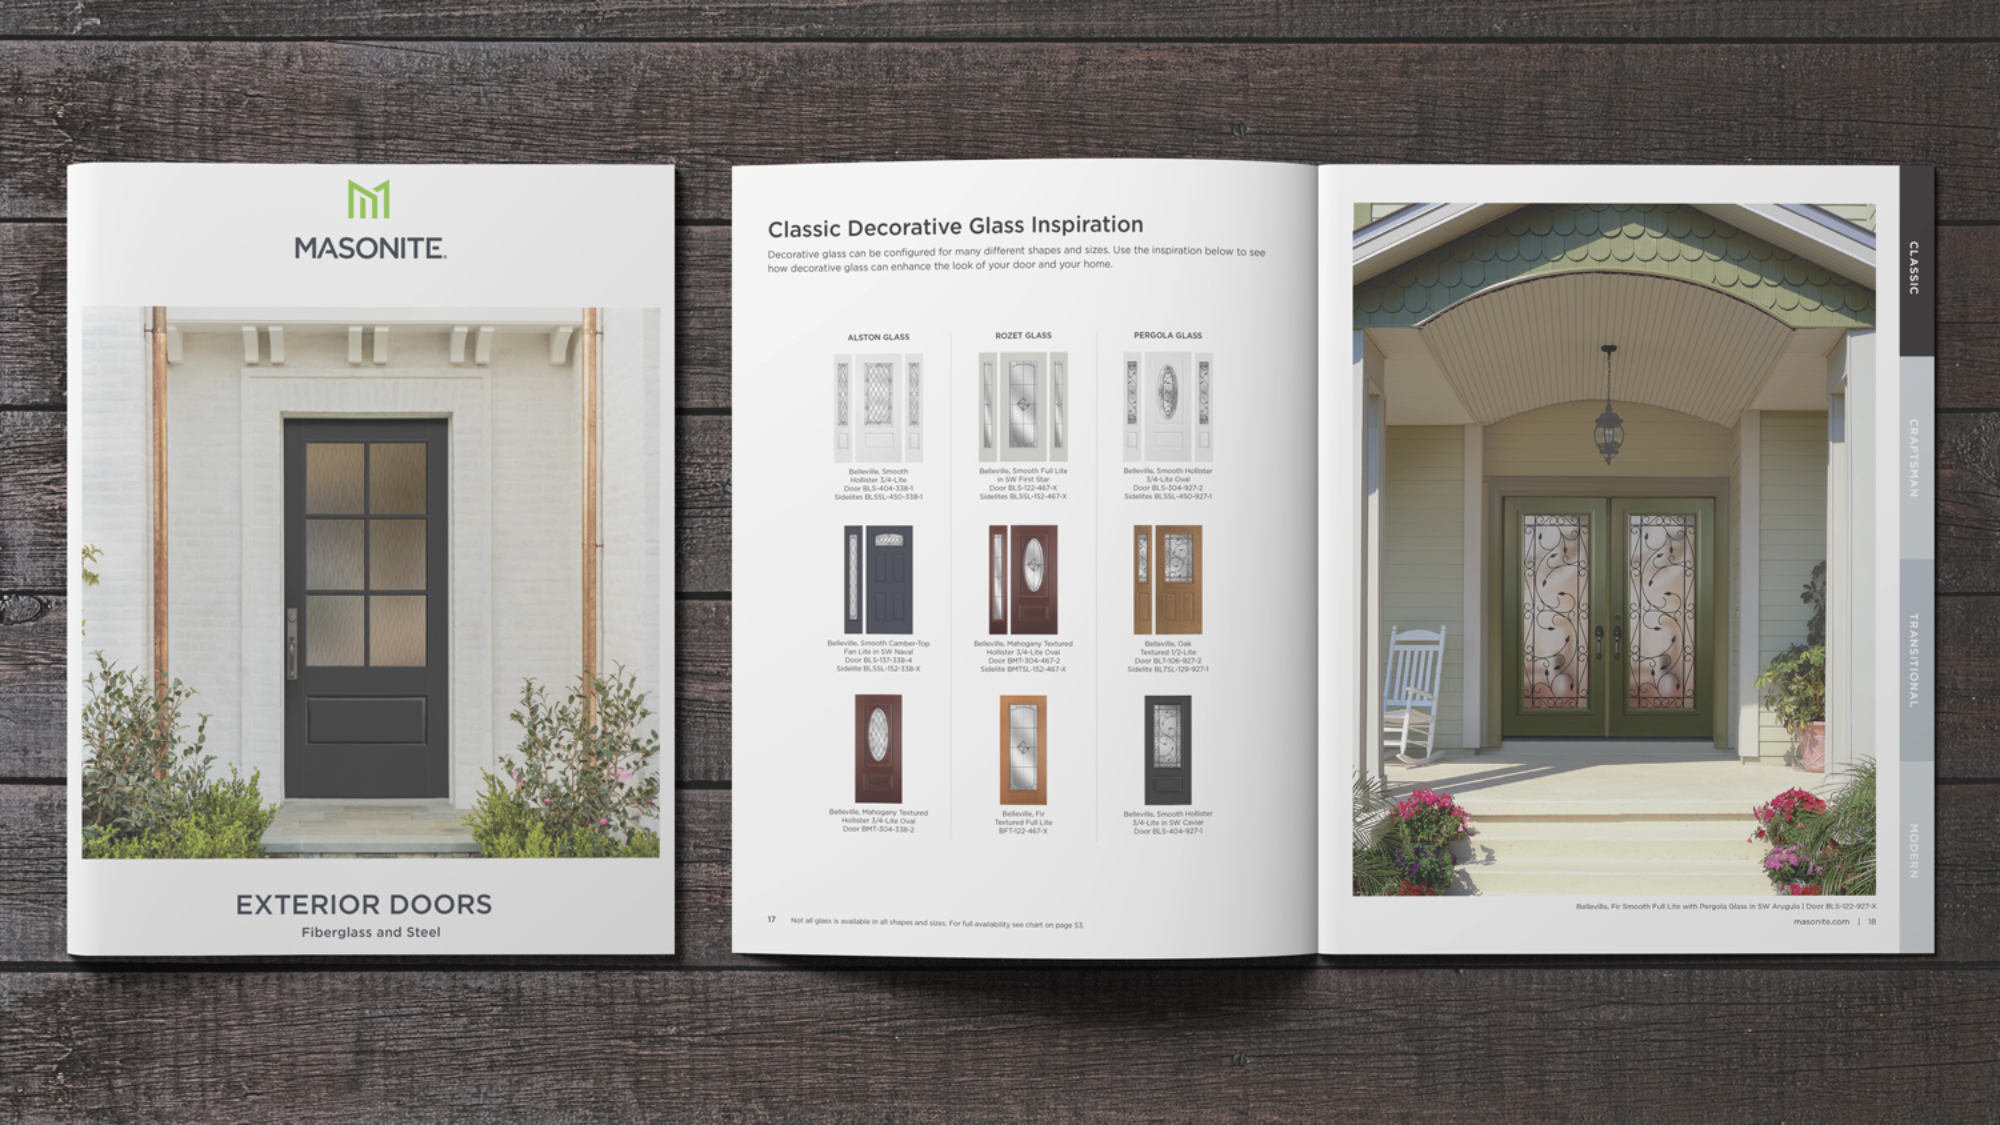 Elevate your home's curb appeal with the stunning selection of Masonite exterior doors showcased in their comprehensive catalog. From traditional to modern designs, Masonite offers exceptional craftsmanship and innovative features that combine style with durability. Explore the Masonite Exterior Door Catalog and discover the perfect entryway solution to make a lasting impression. Upgrade your home's exterior with Masonite today.